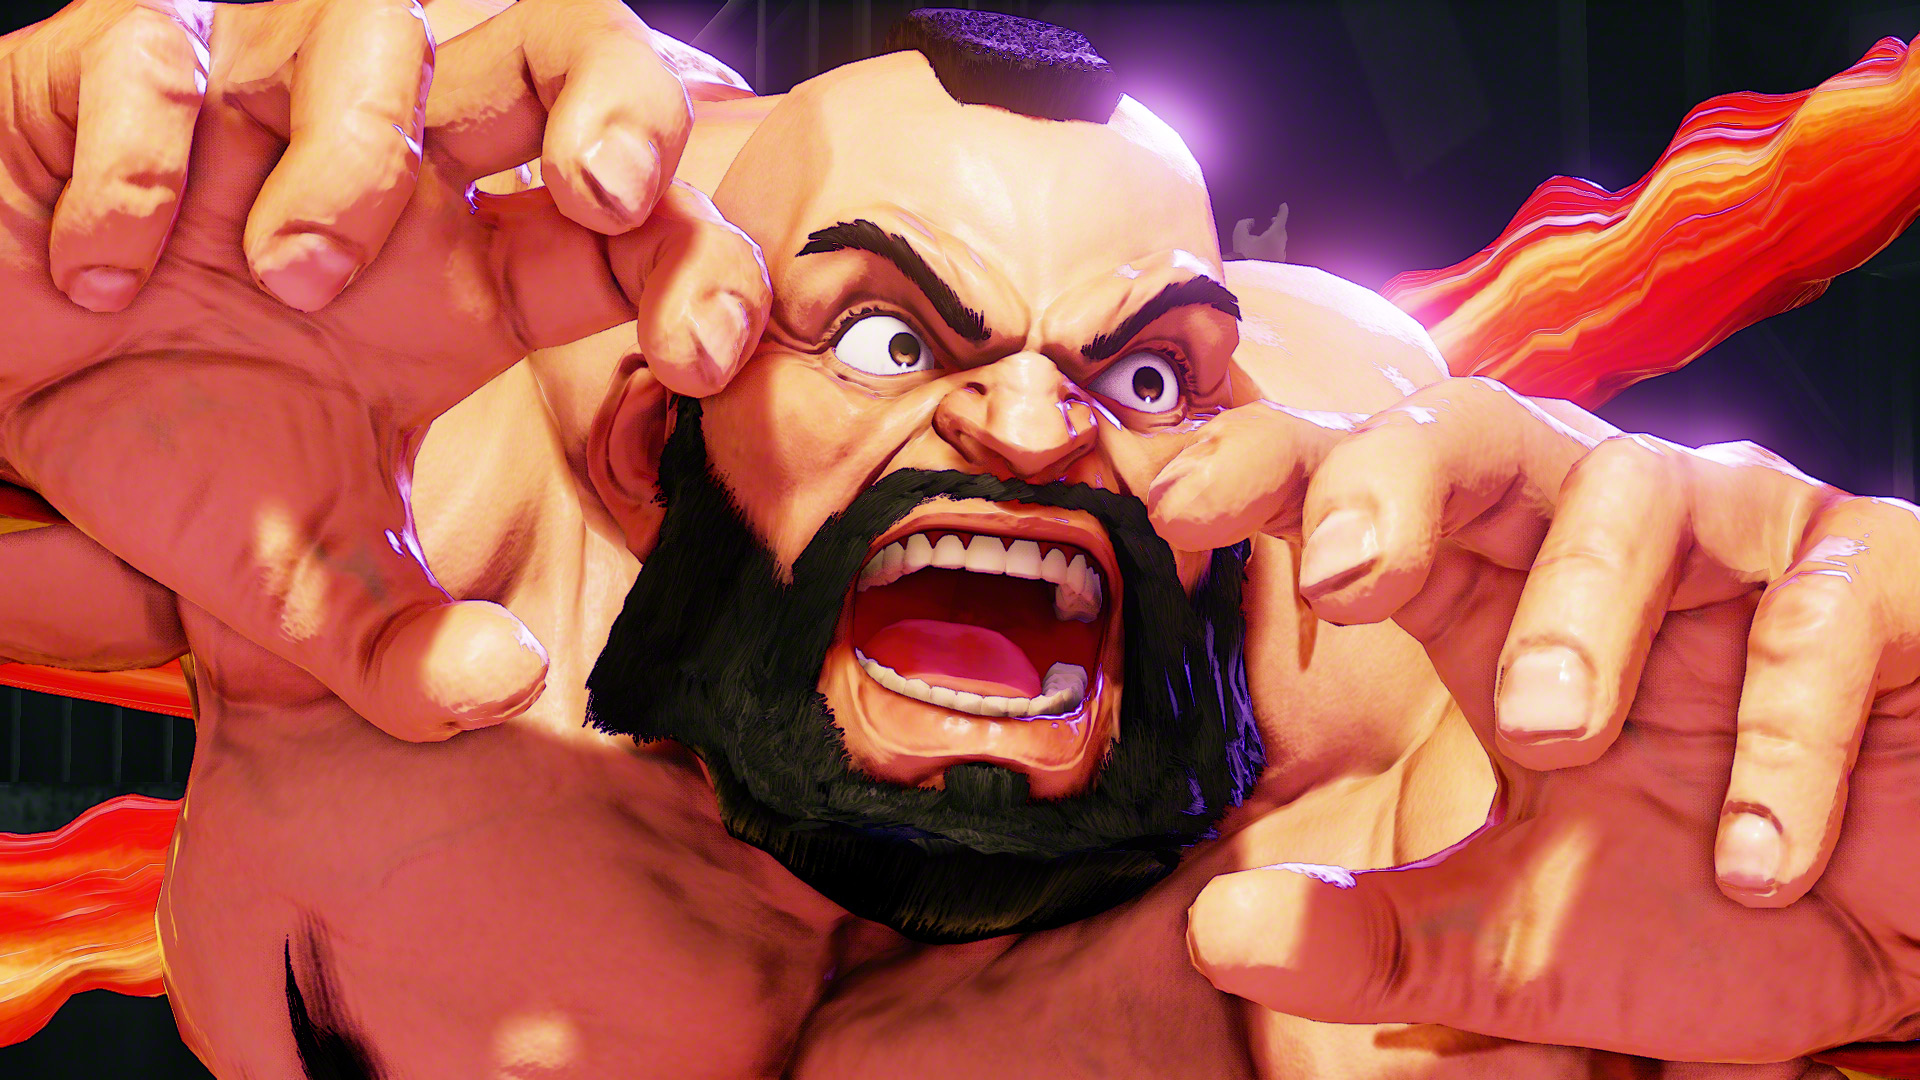 Zangief is coming back for Street Fighter 5 | Polygon